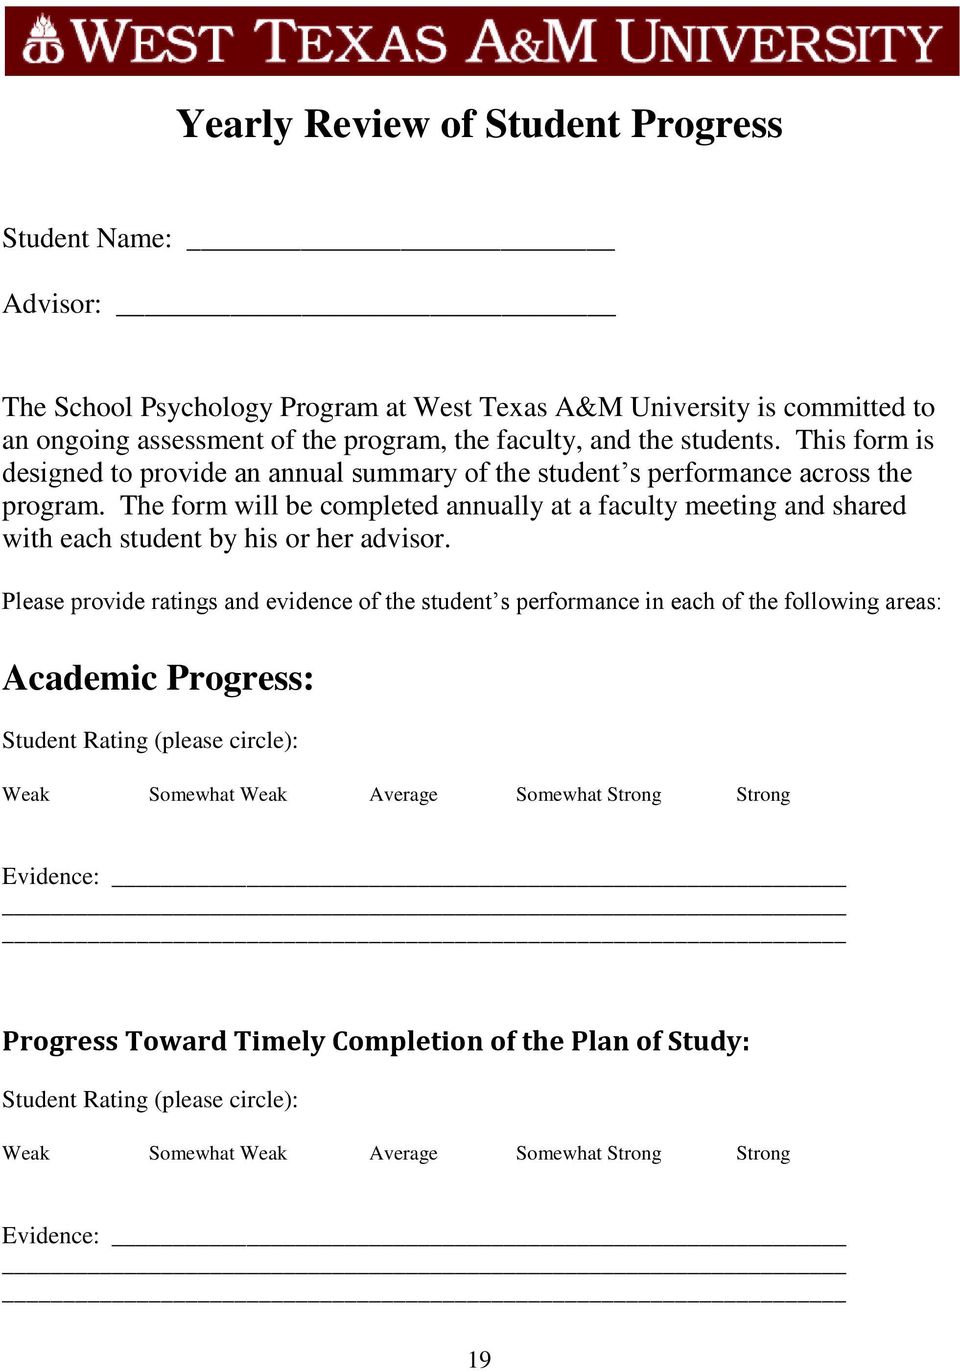 The form will be completed annually at a faculty meeting and shared with each student by his or her advisor.